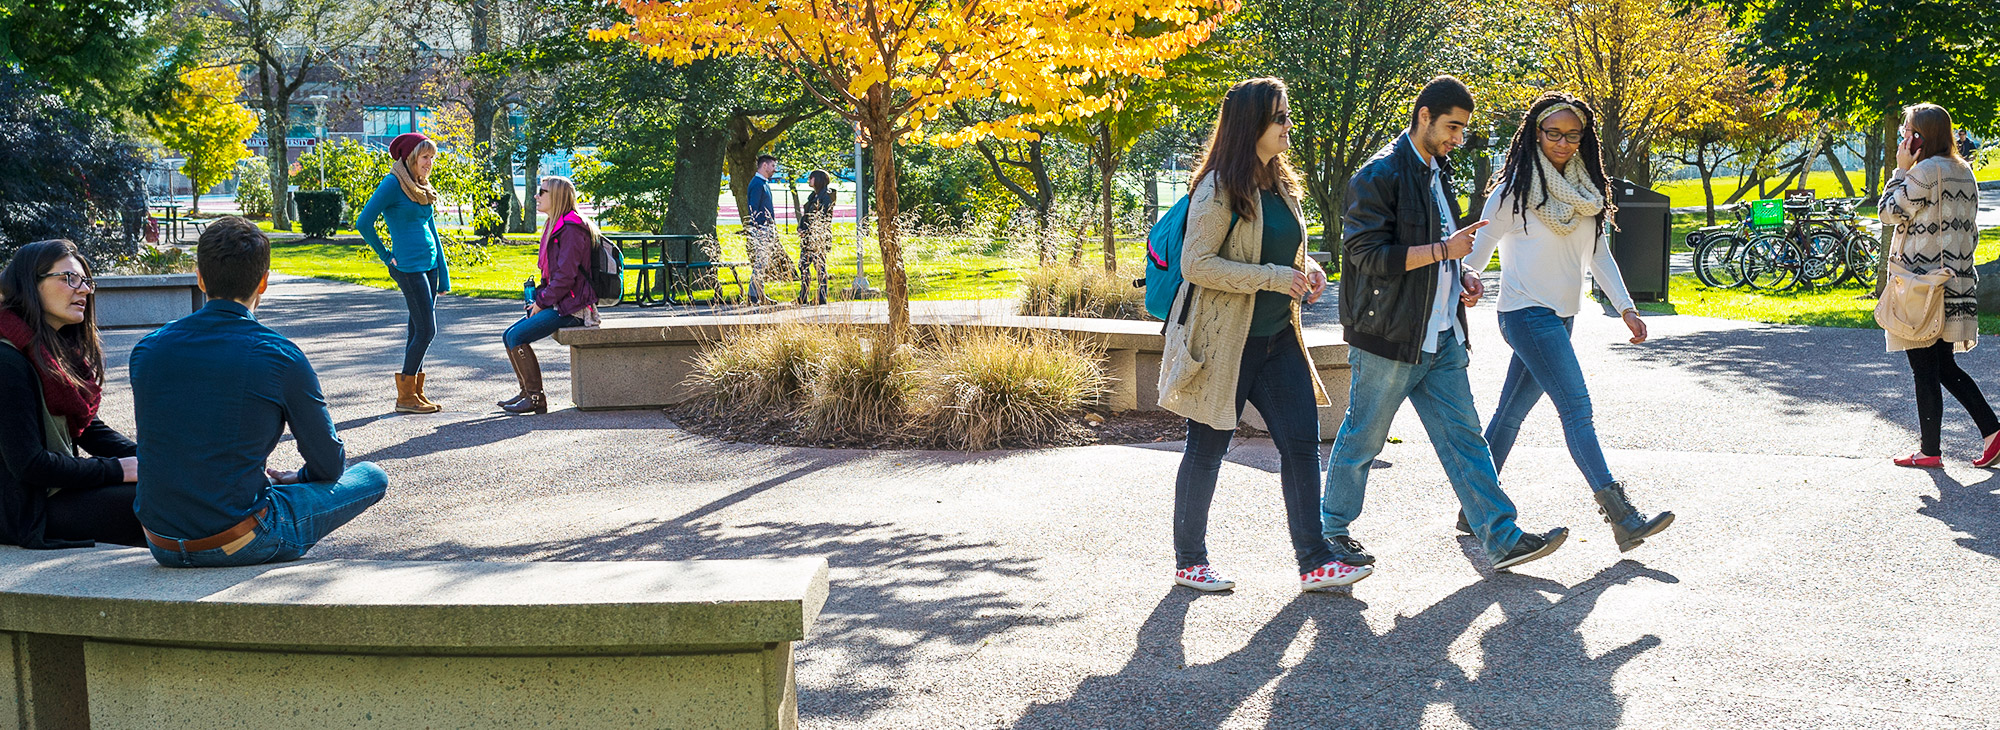 Students walking through the quad on a fall day.